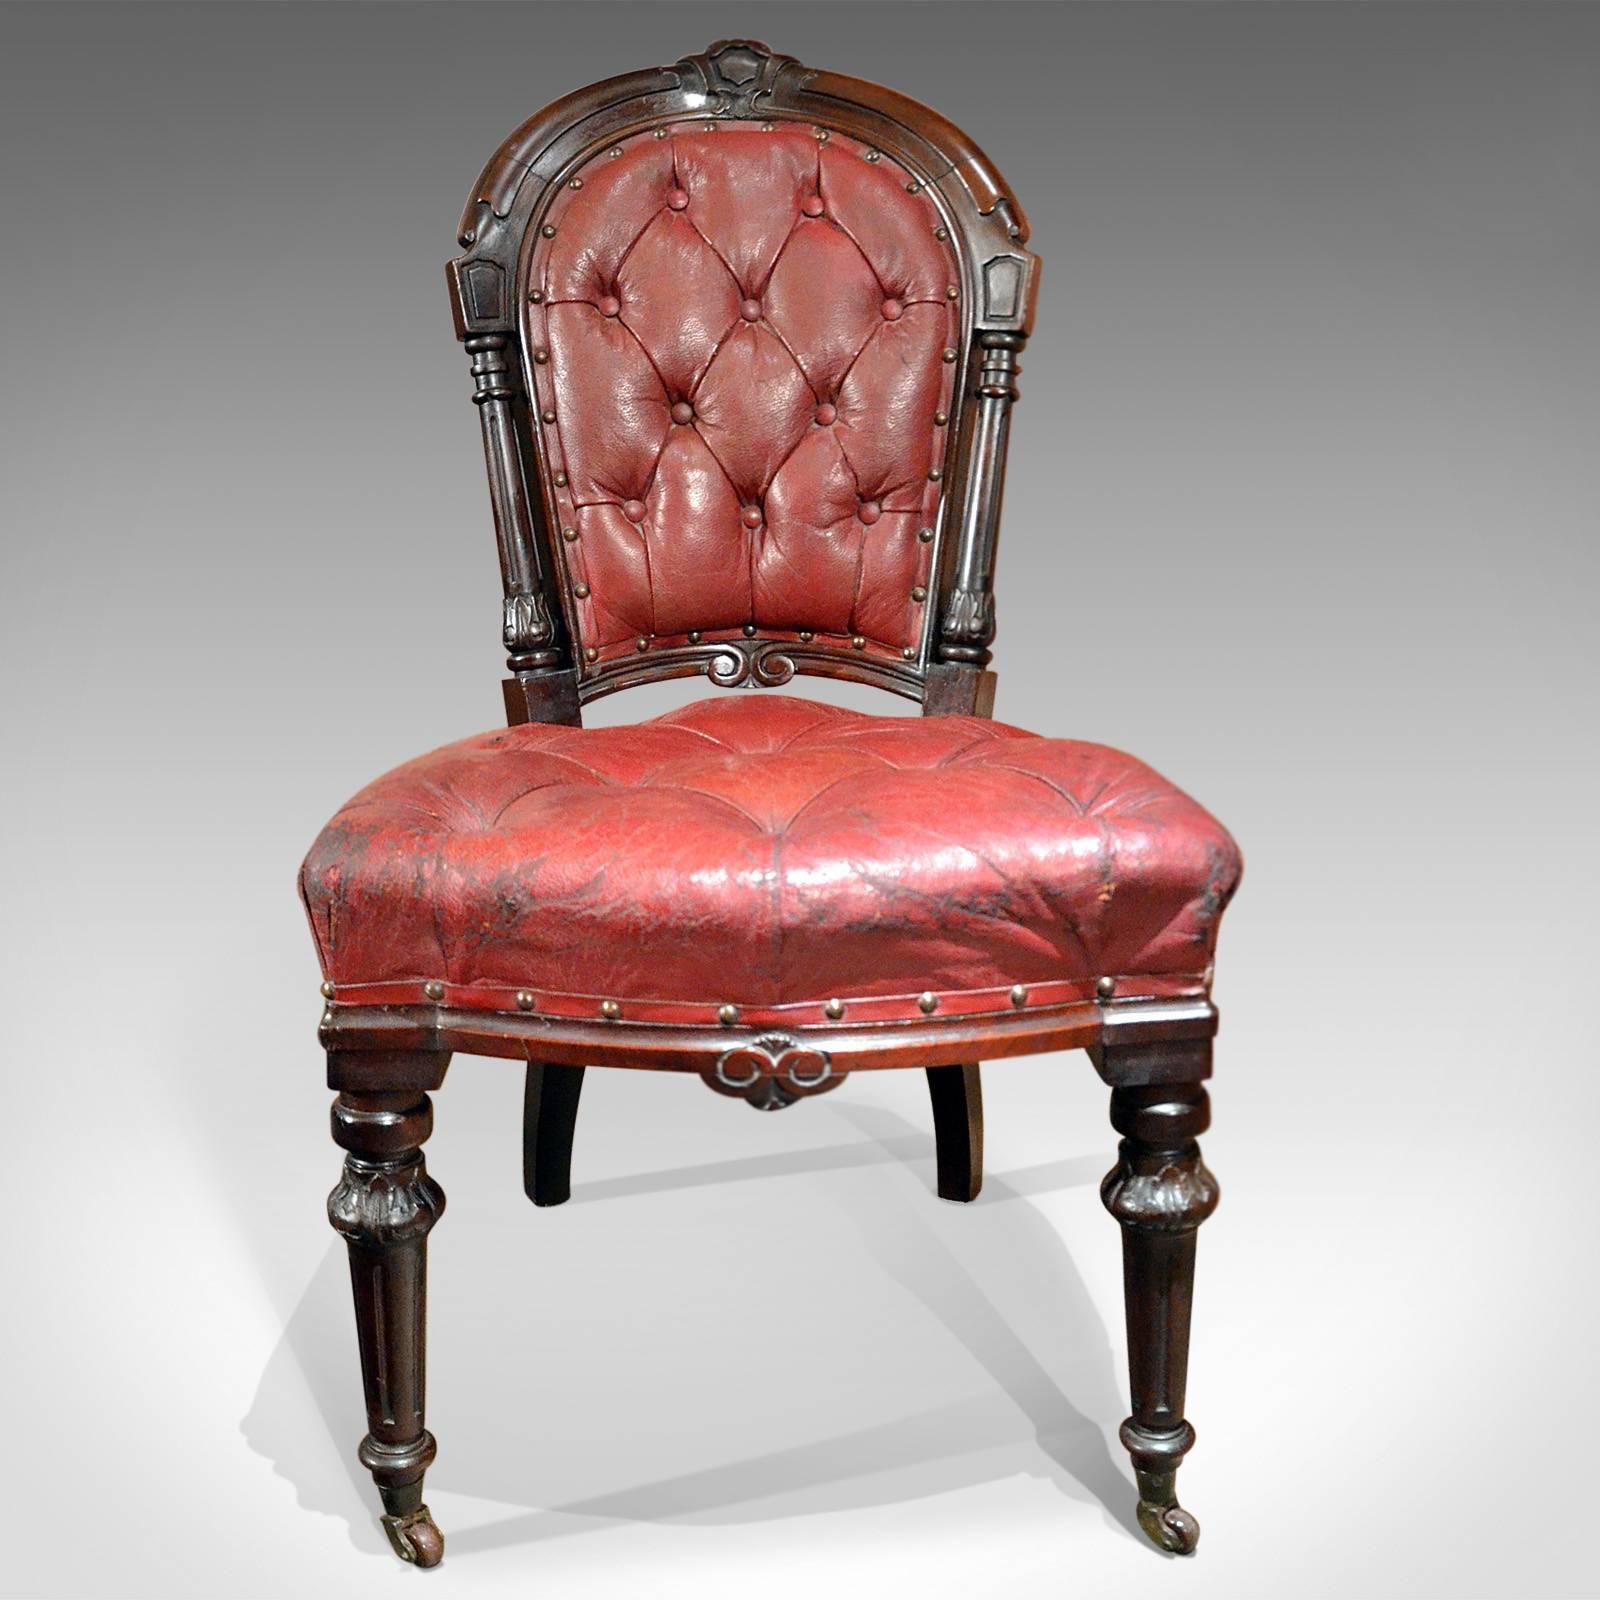 This is an English Late Regency button-backed library chair in a beautiful aged burgundy red leather.

Rich with, and retaining, an historical charm and grace this elegant chair, dating to circa 1830, draws influence and motif from ancient Rome as